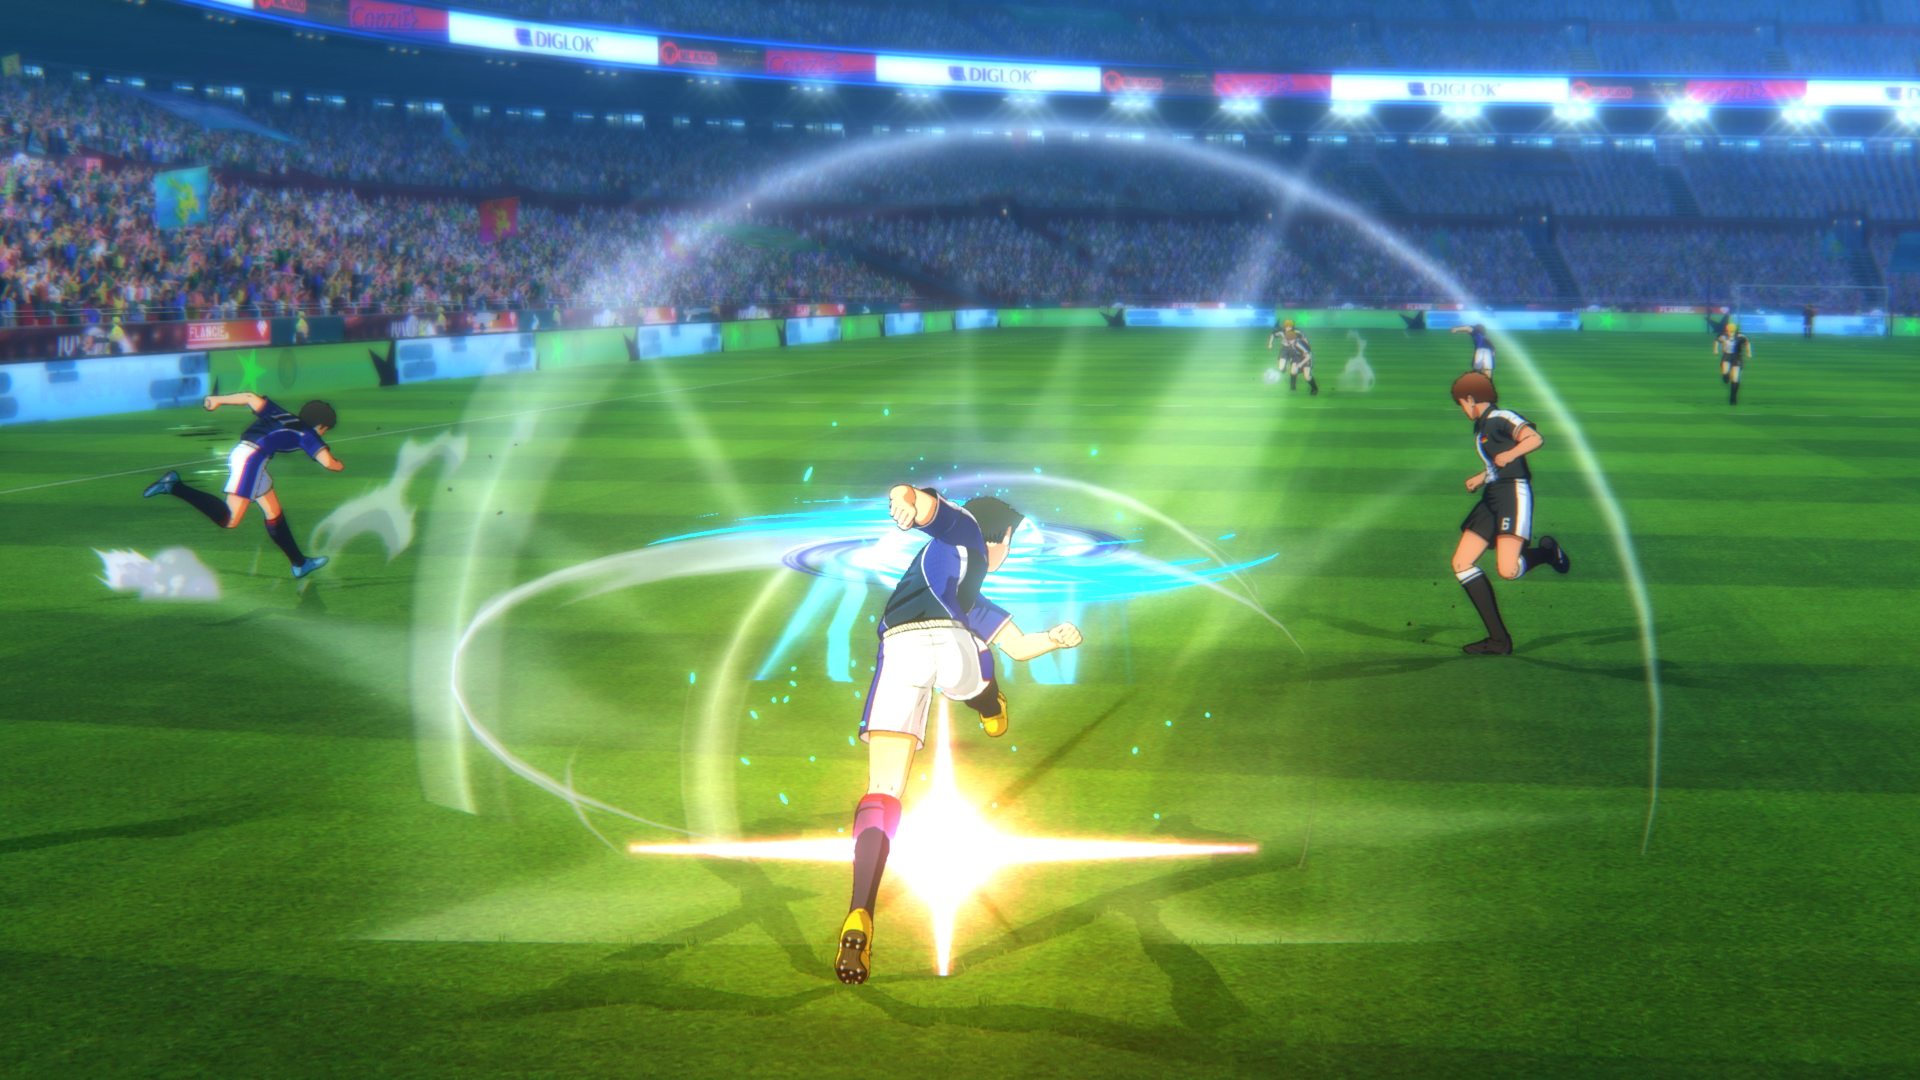 Captain Tsubasa: Rise of New Champions Story Mode is